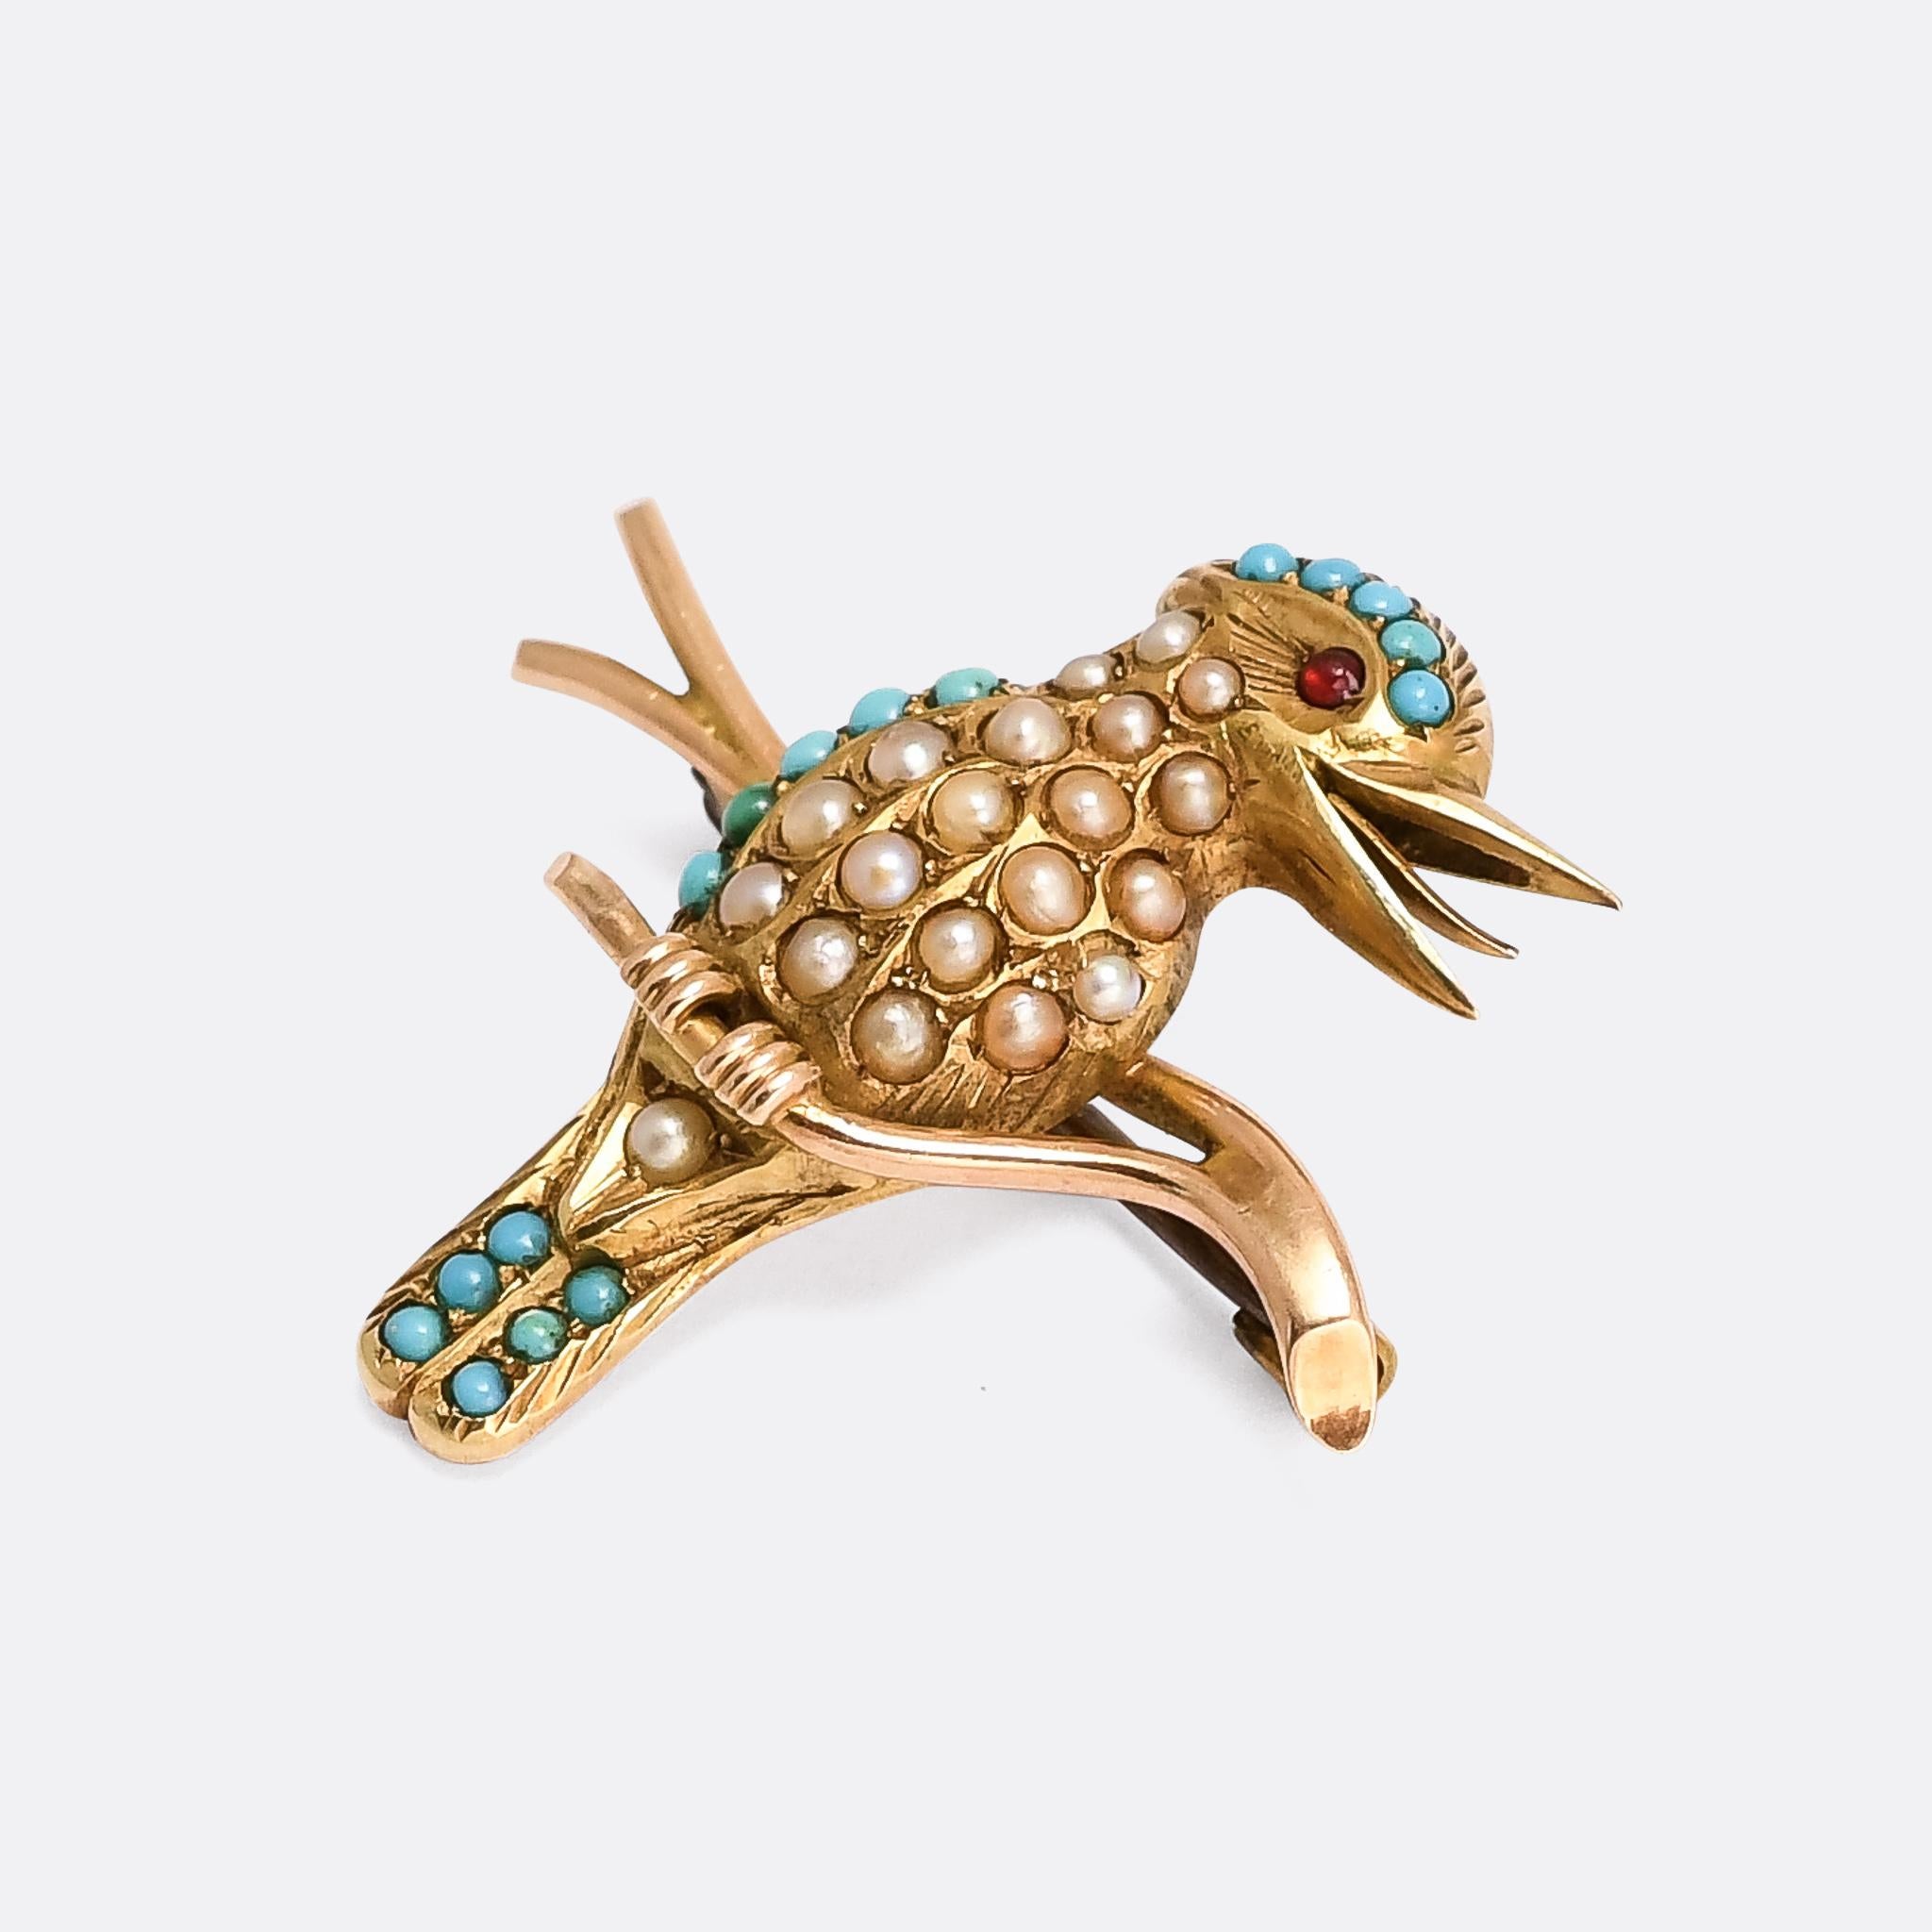 A beautifully made antique kookaburra brooch dating from the late Victorian period, circa 1890. It's crafted in 15 karat gold and set with turquoise and split pearls, and a ruby cabochon eye. The bird, native to eastern mainland Australia, is a